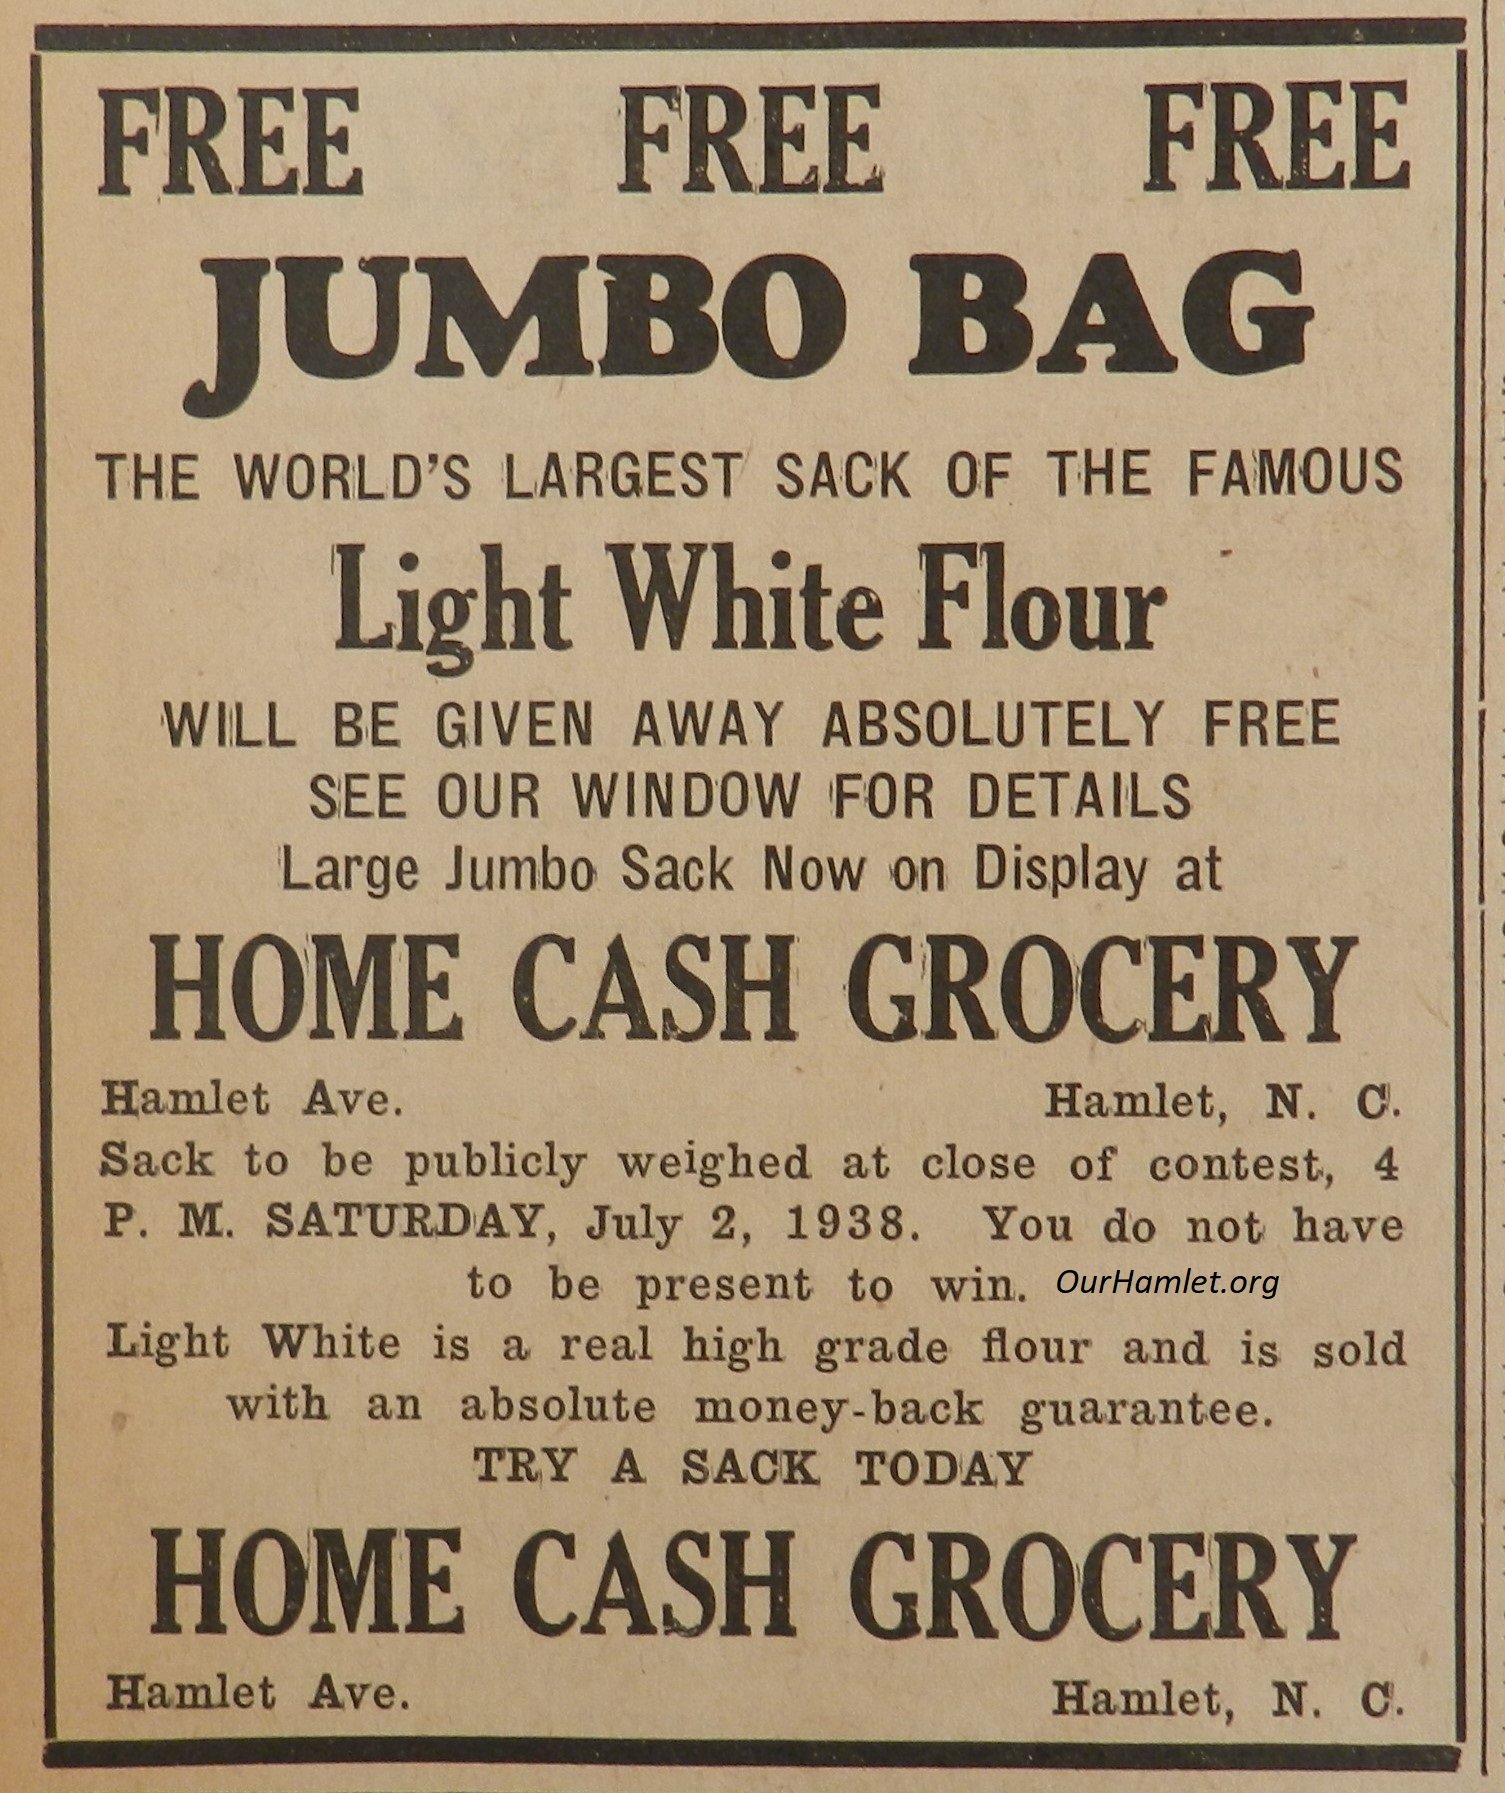 1938 Home Cash Grocery OH.jpg